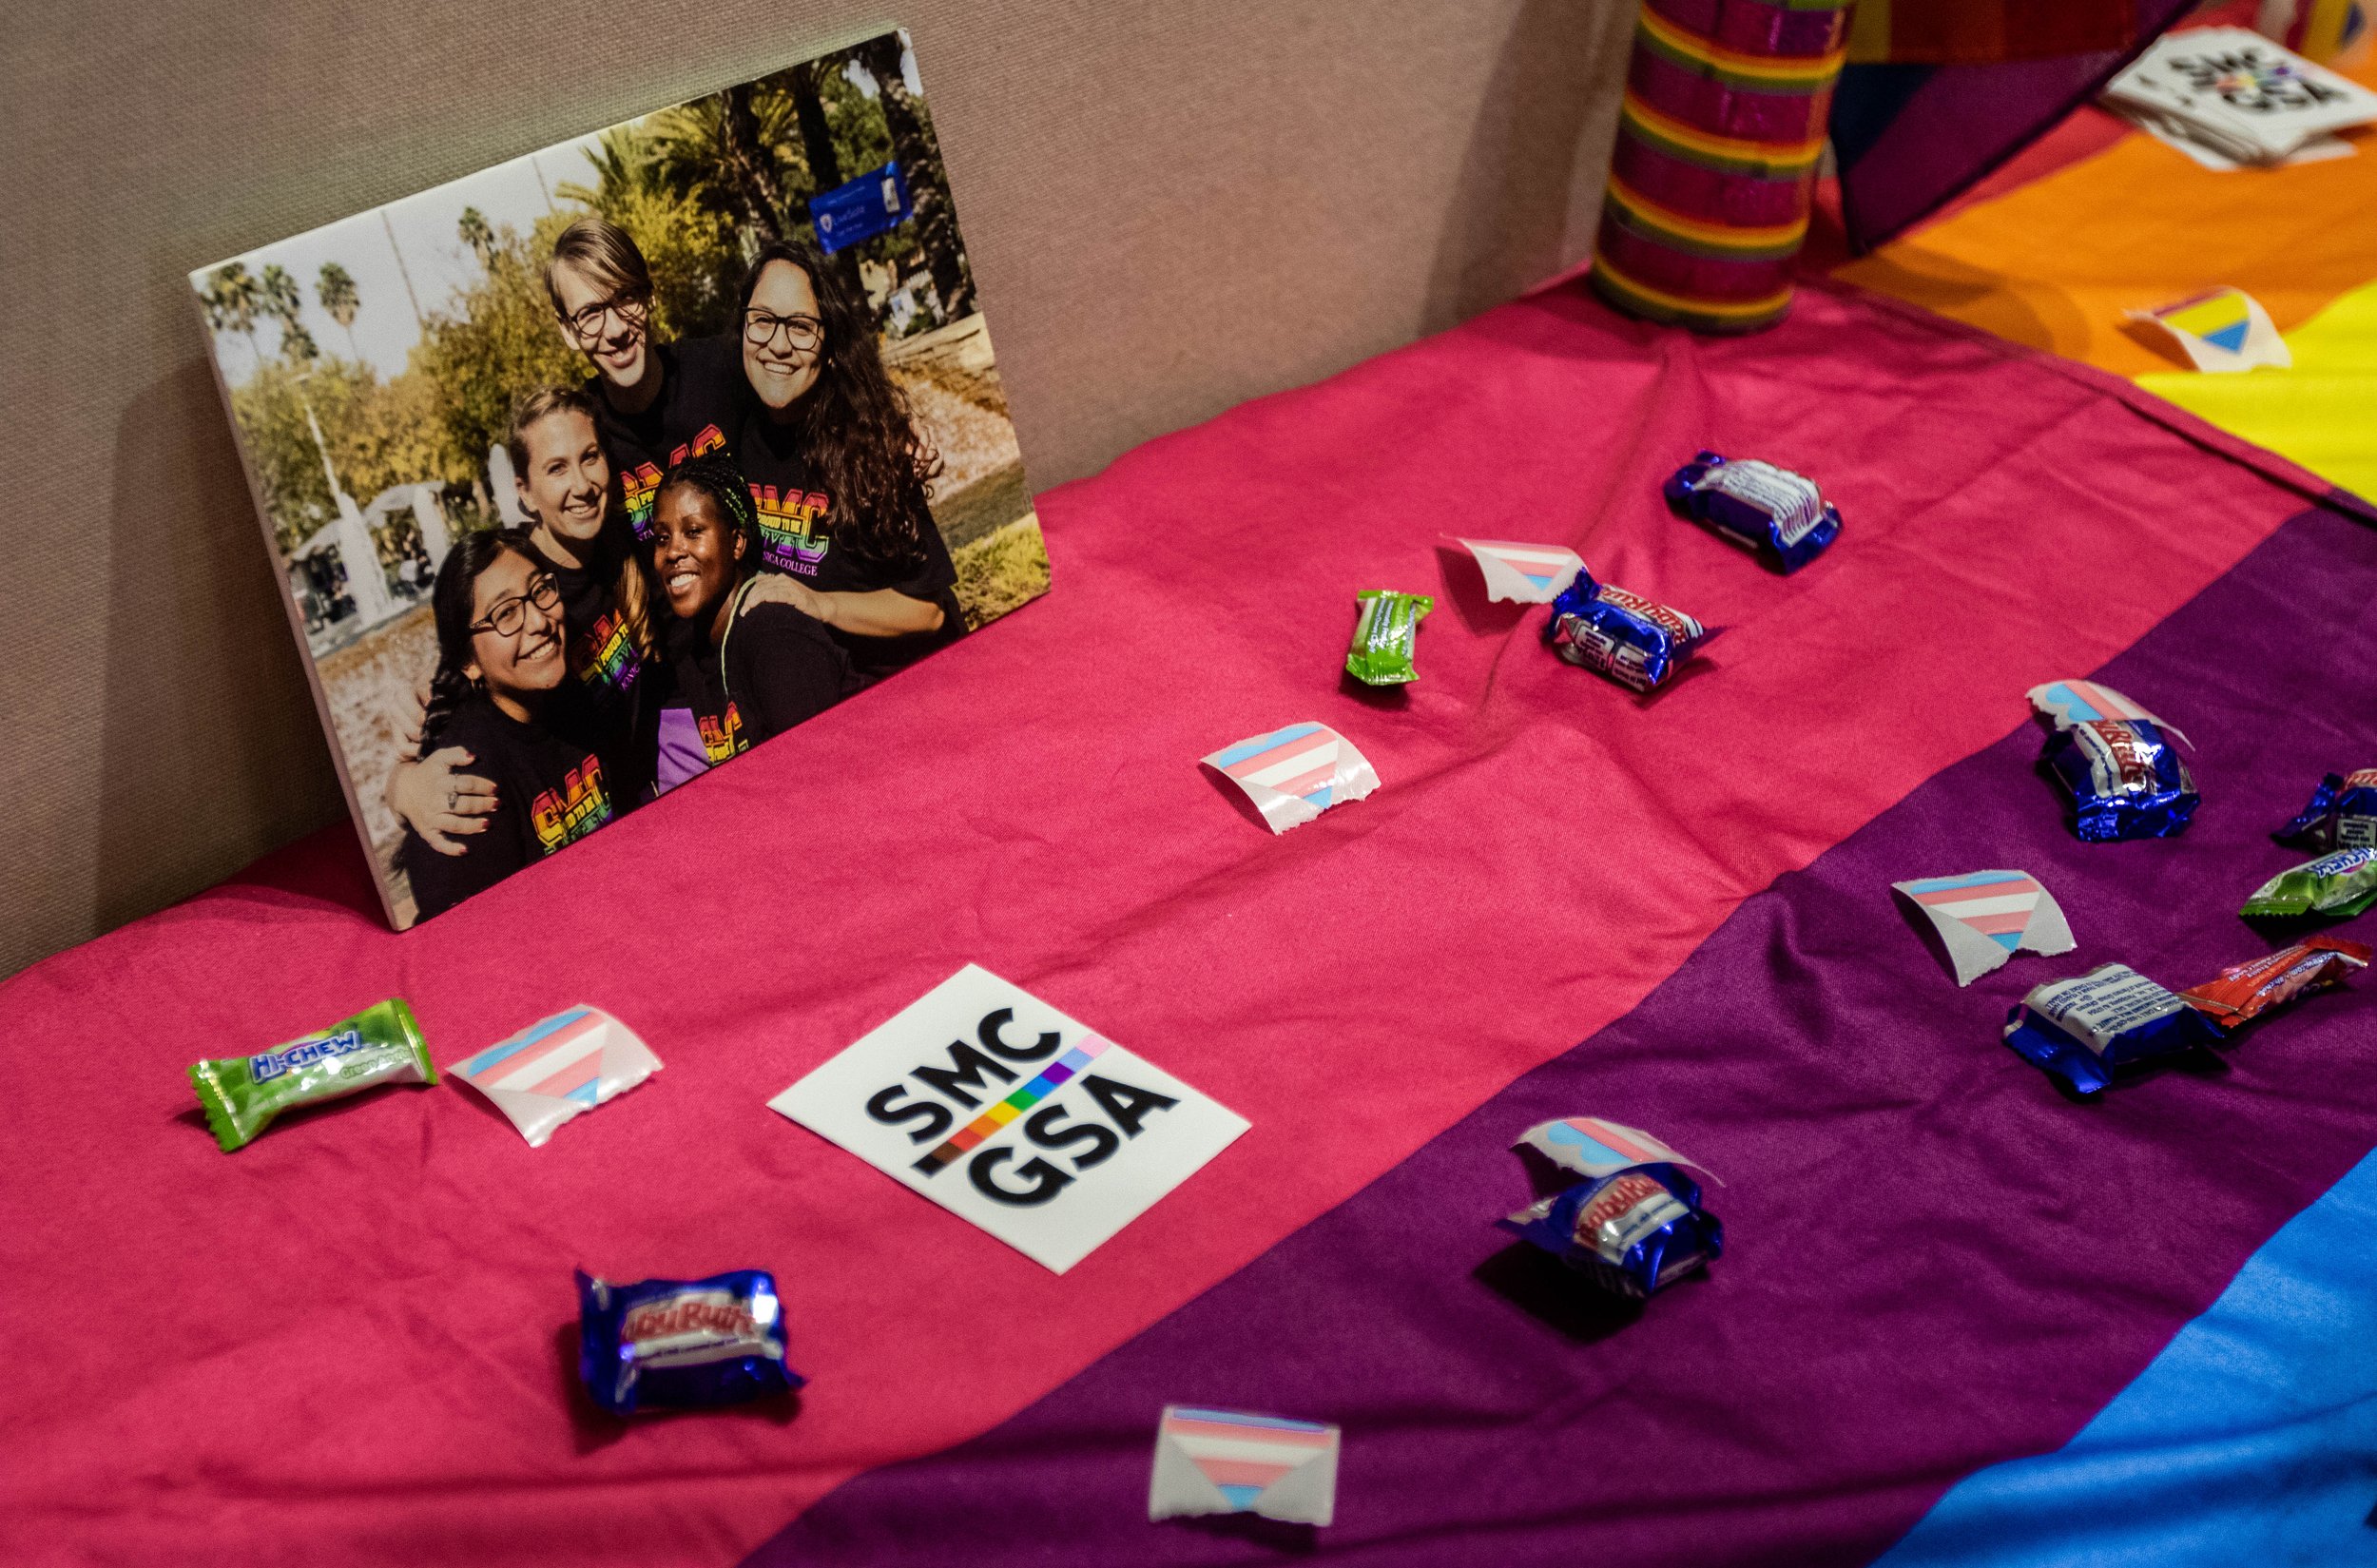  A booth set up by the Santa Monica College Gender Sexuality Club by the stage of the Student Services Orientation Hall. The booth is filled with GSA pins and candy to promote the GSA Club to students attending SMC guest speaker Denice Frohman's poet